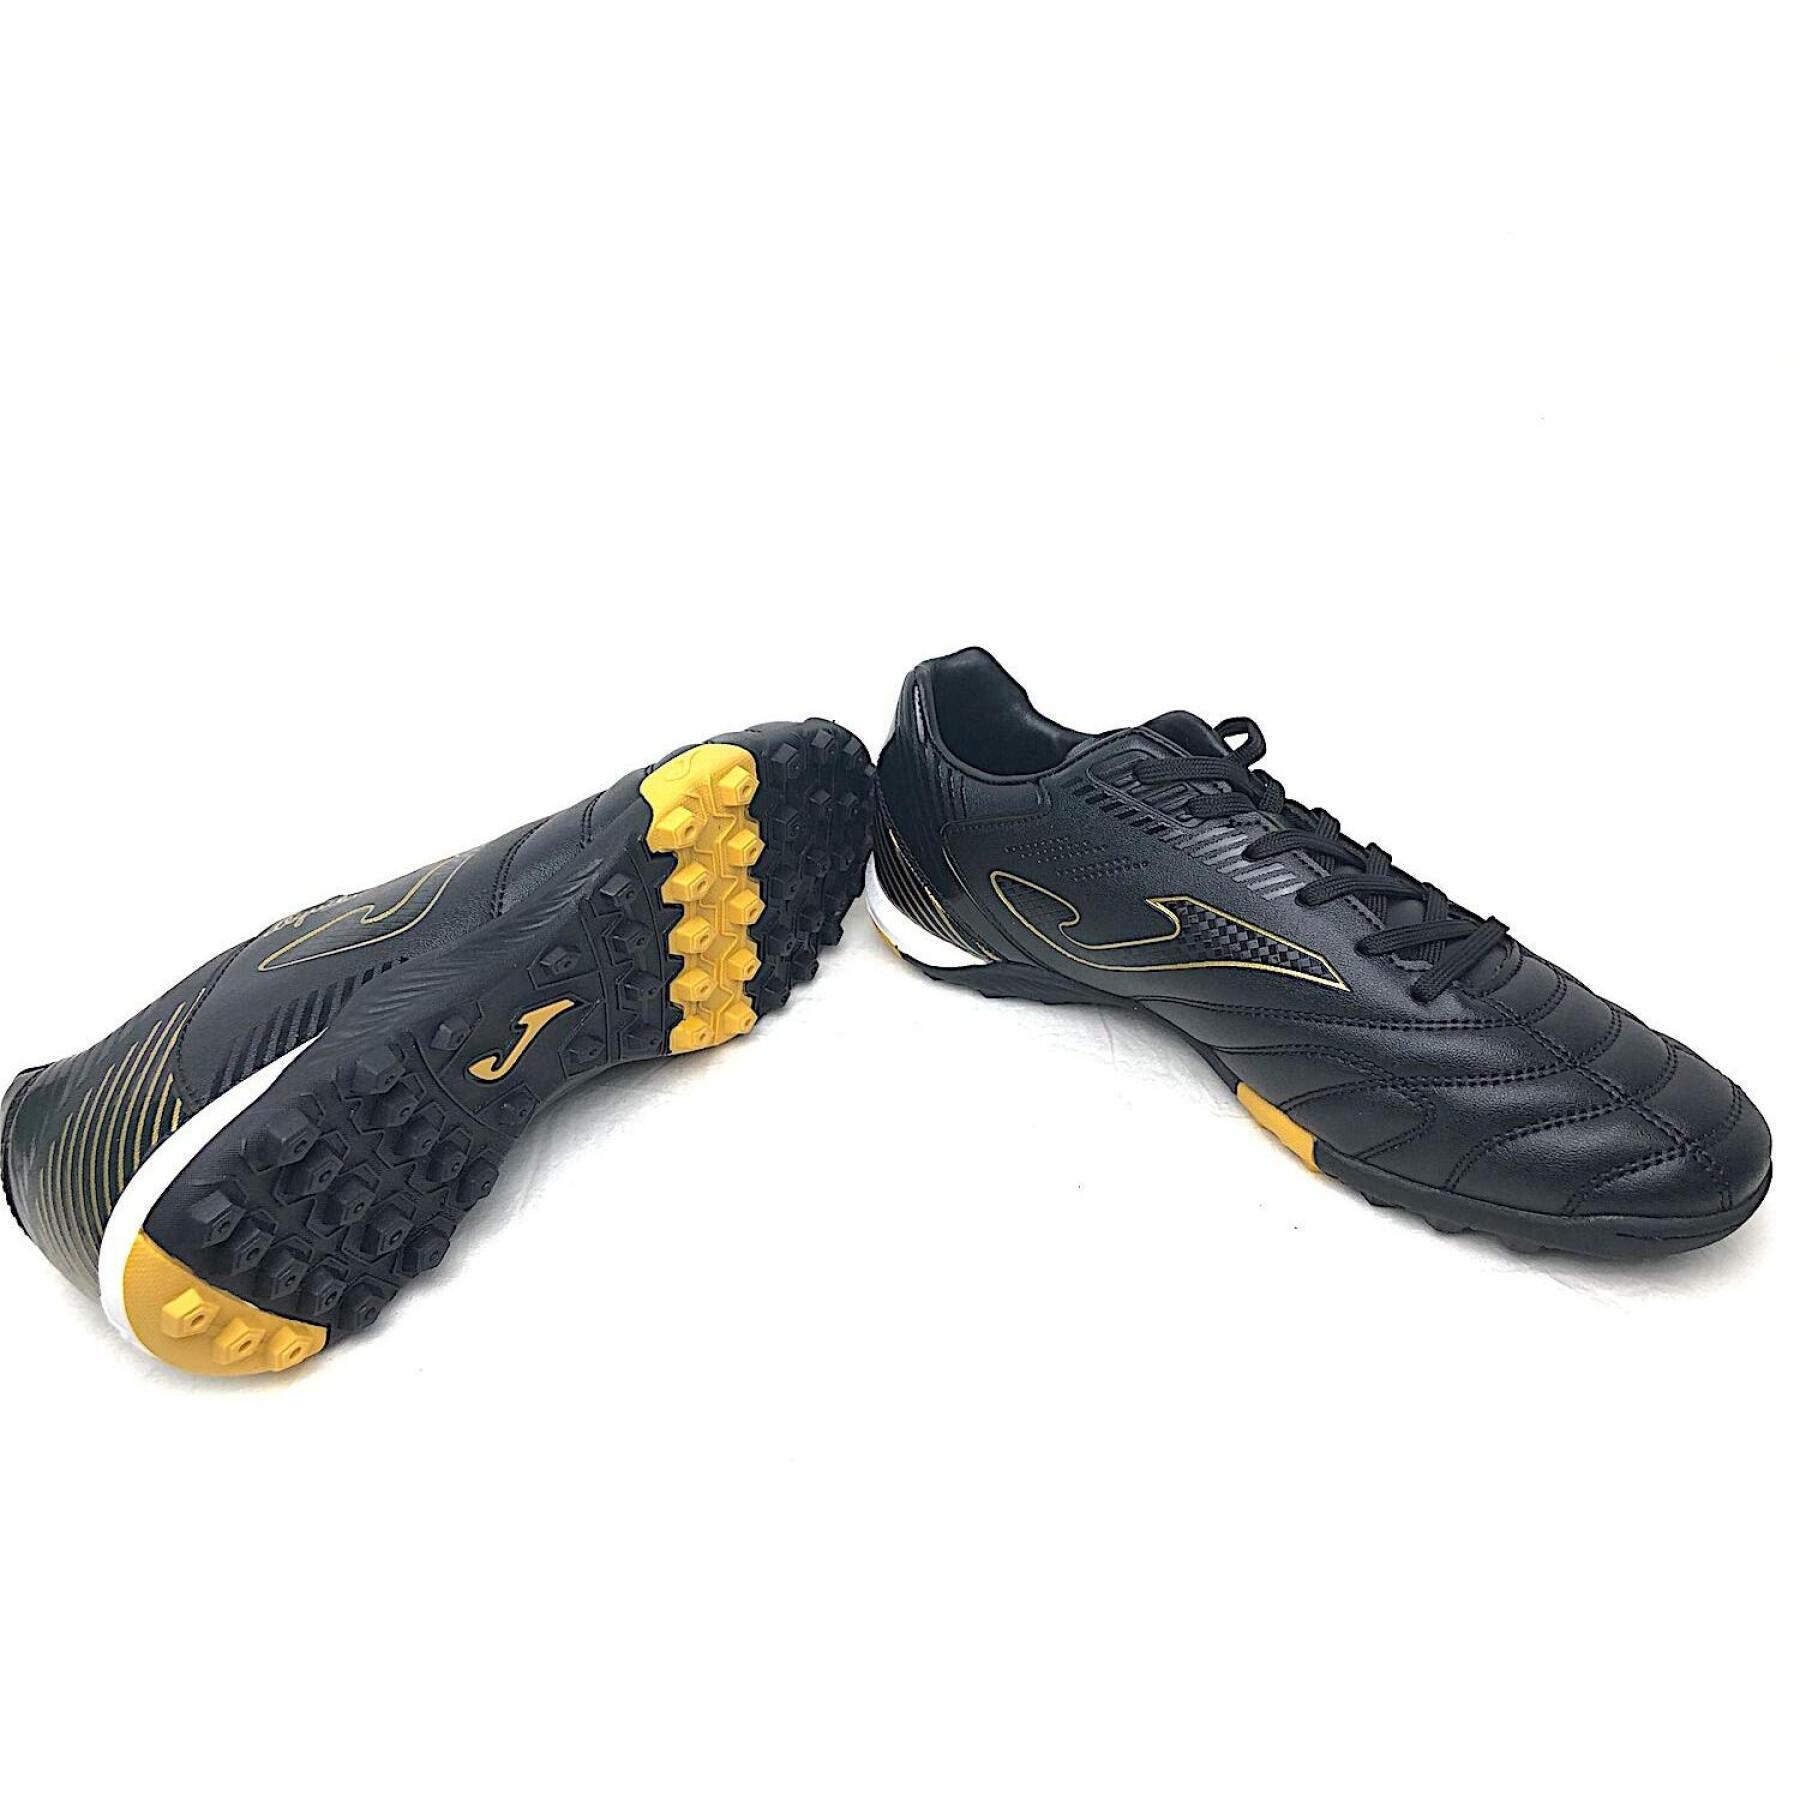 Chaussures Joma Aguila Turf 2001 ORO